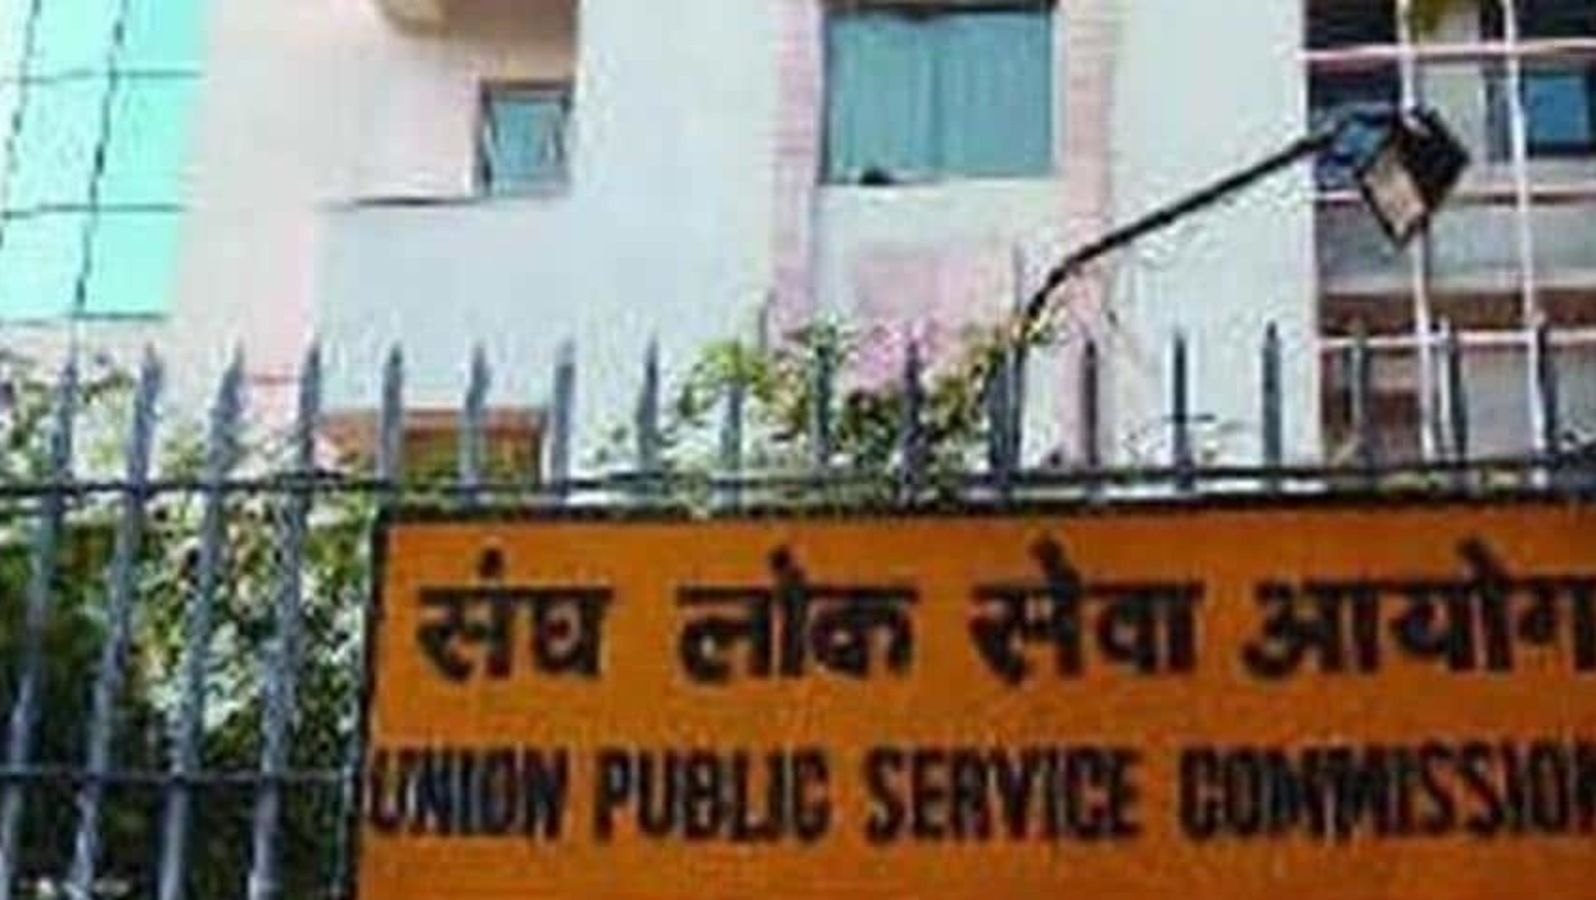 UPSC NDA/NA II Exam 2021: Last date to apply today for 400 posts on upsc.gov.in